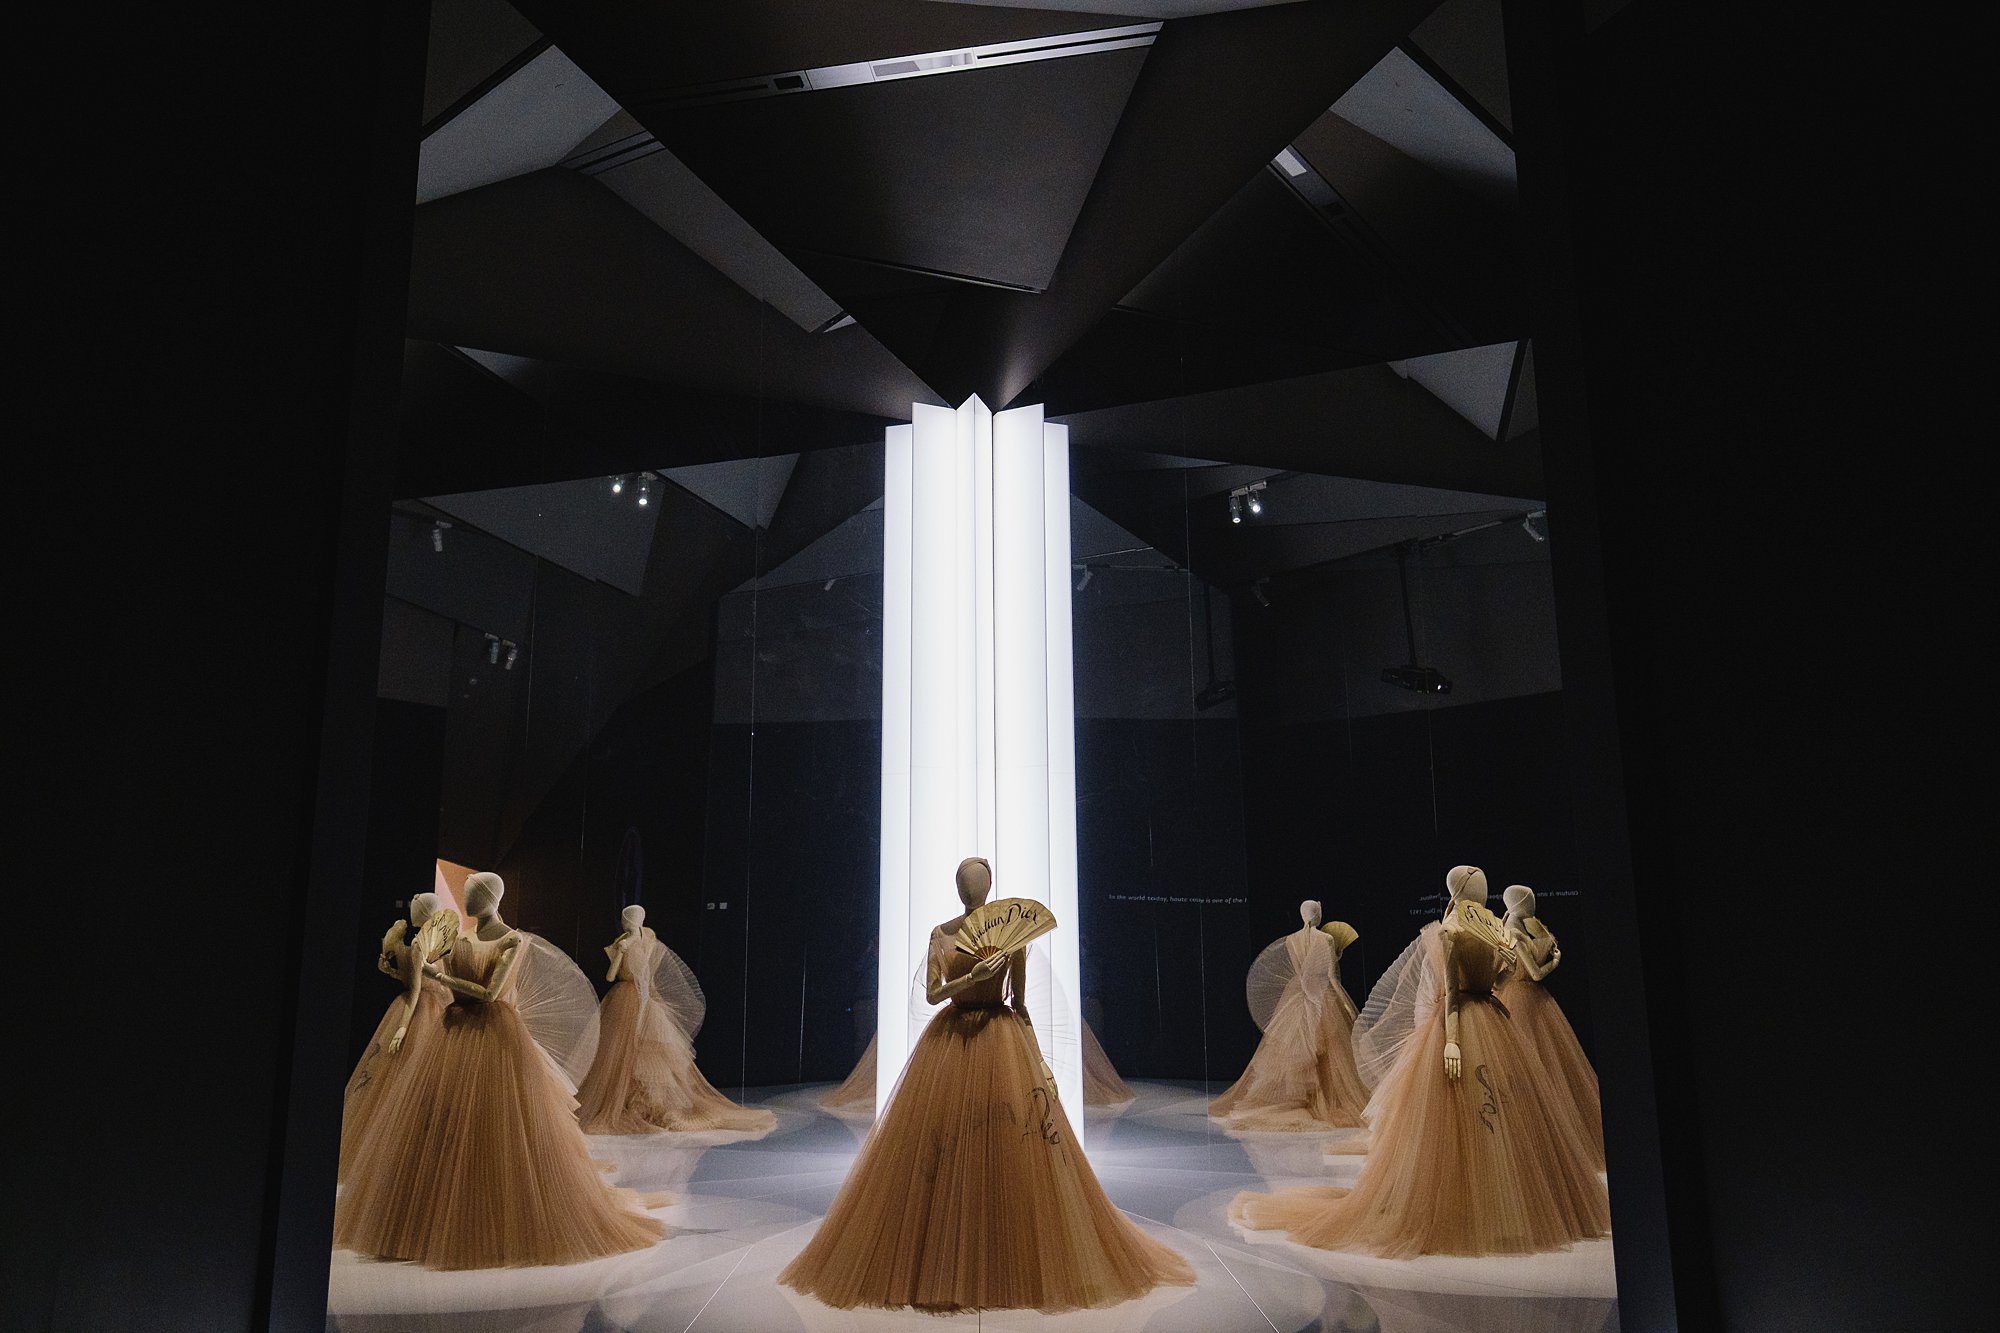 The Dior collection at the V&A, by London PR Photographer Owen Billcliffe